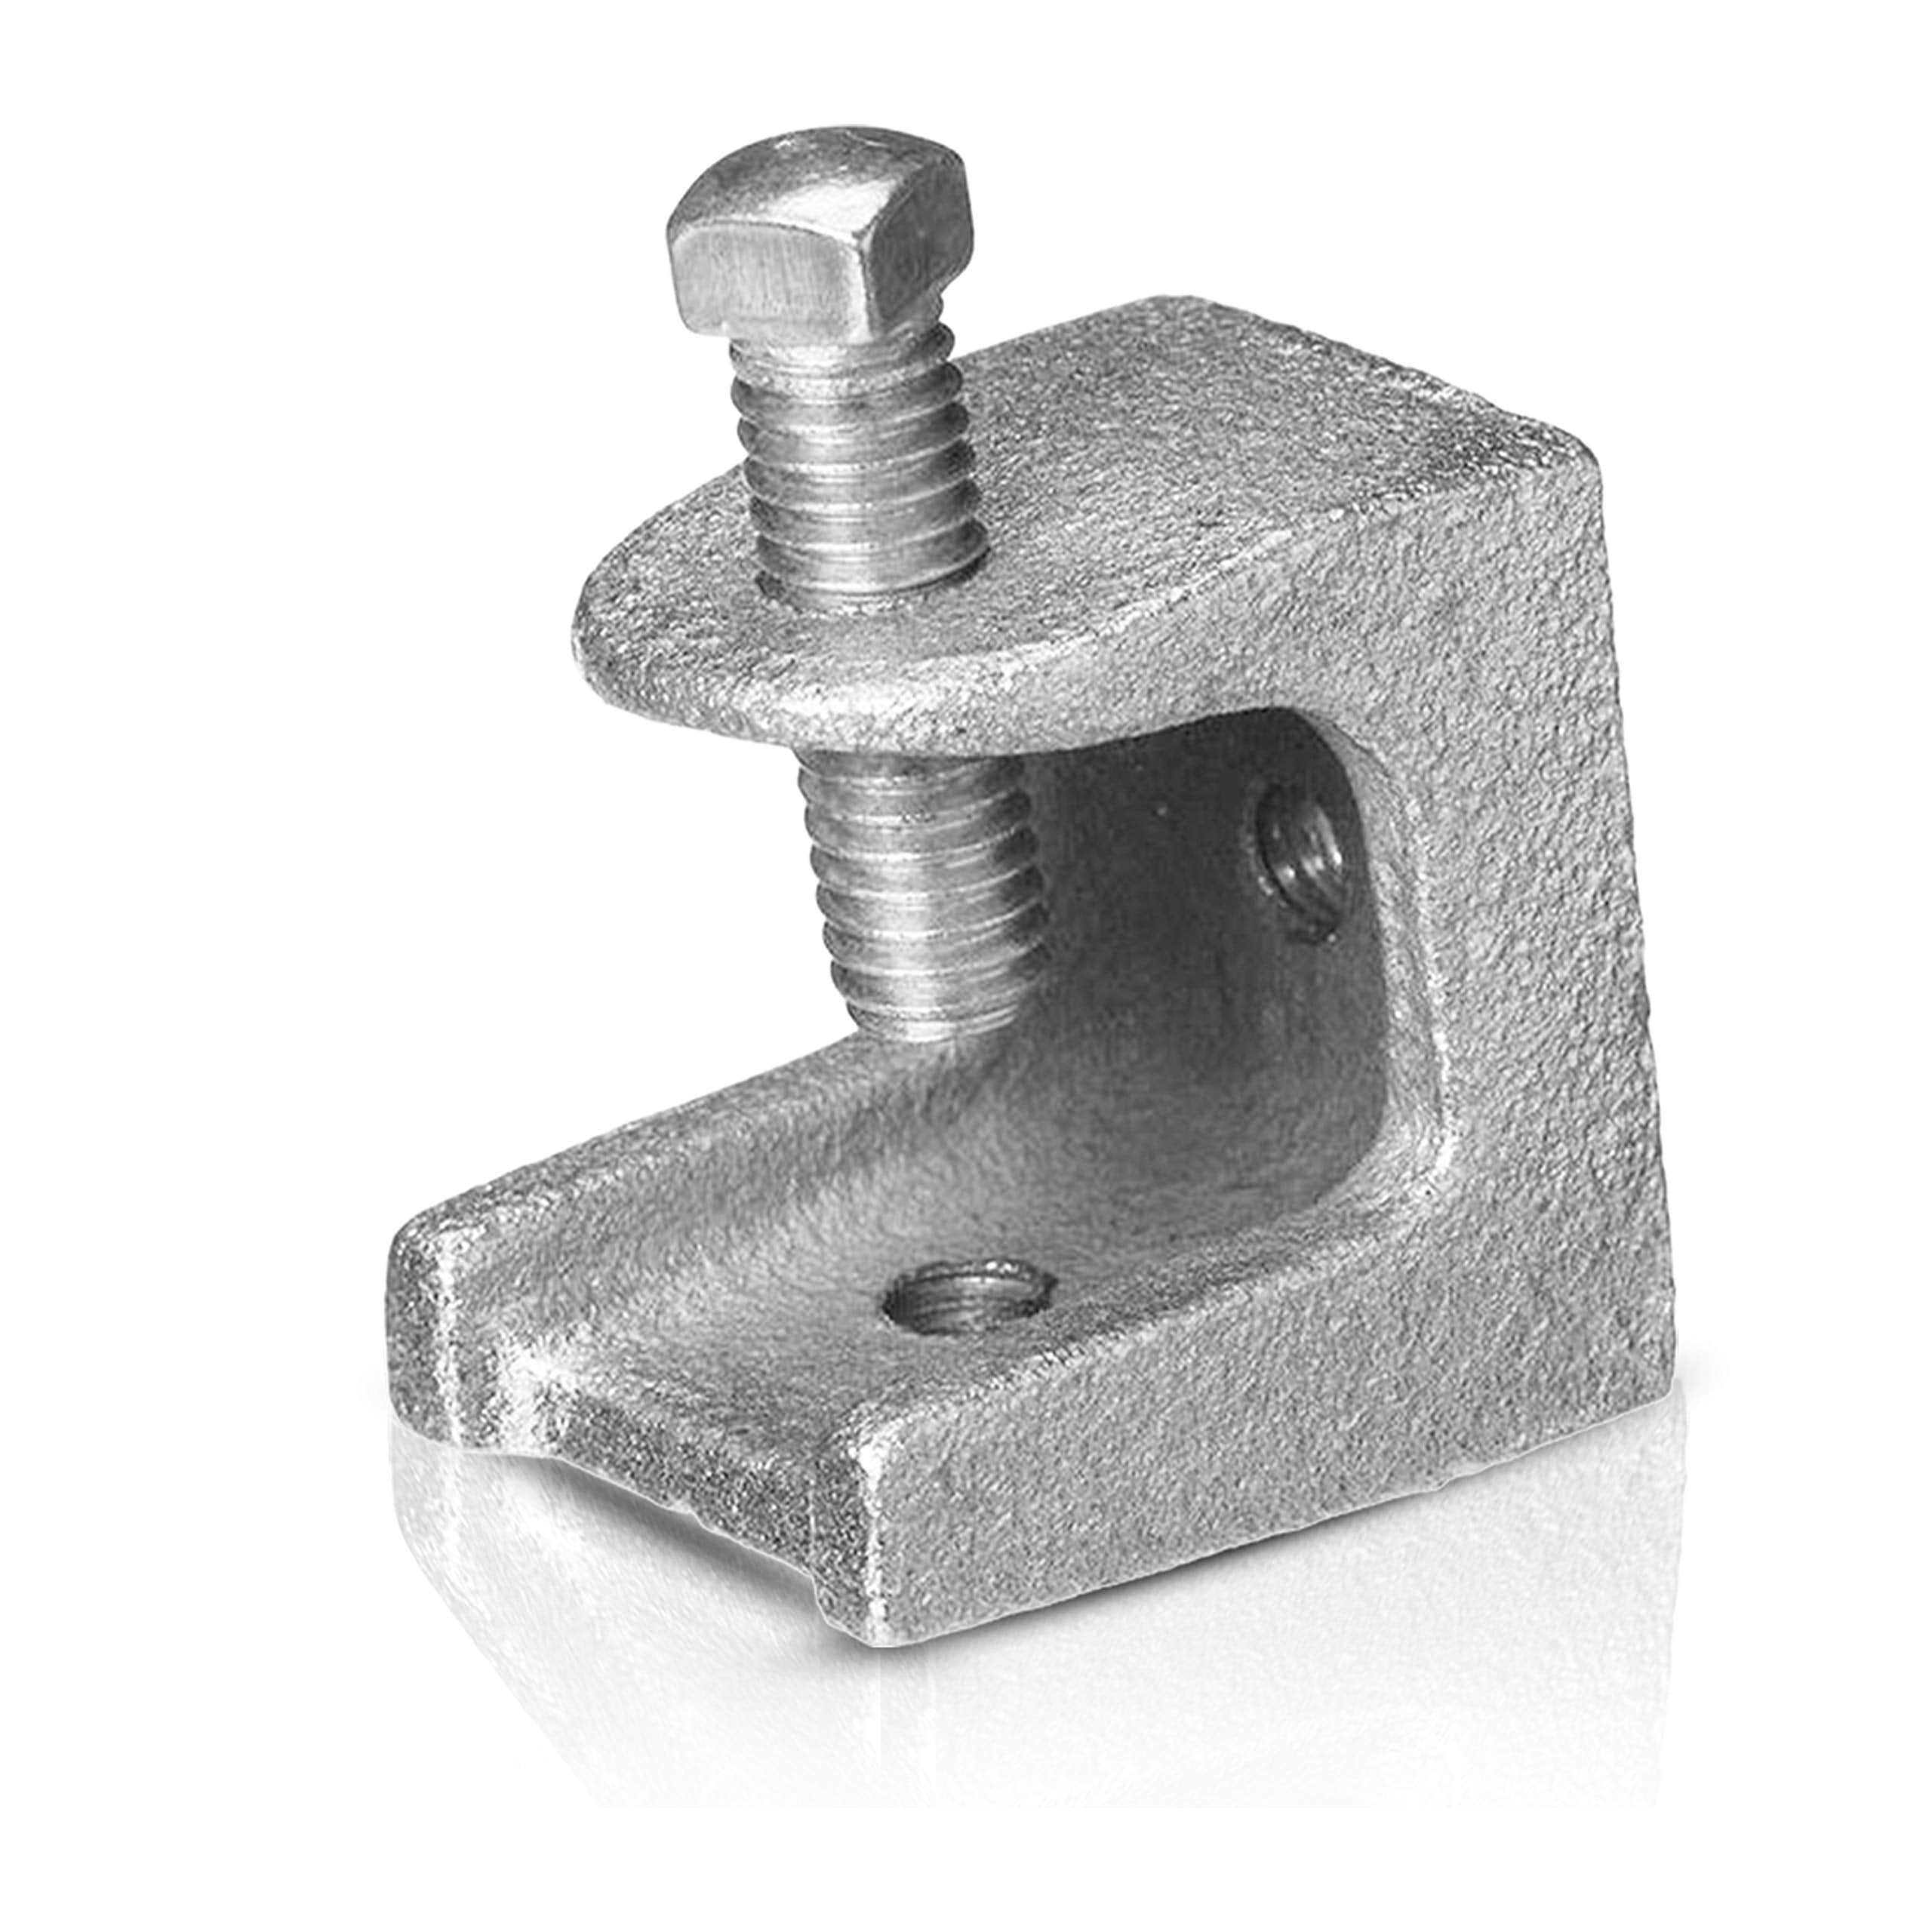 OhLectric Ol-72839 Beam C Clamp - Malleable Iron, Zinc Plated Beam Clamp - Features 1-1/8 inch Jaw Opening, 1/2 inch-13 Set Screw Size and 750 lbs Max